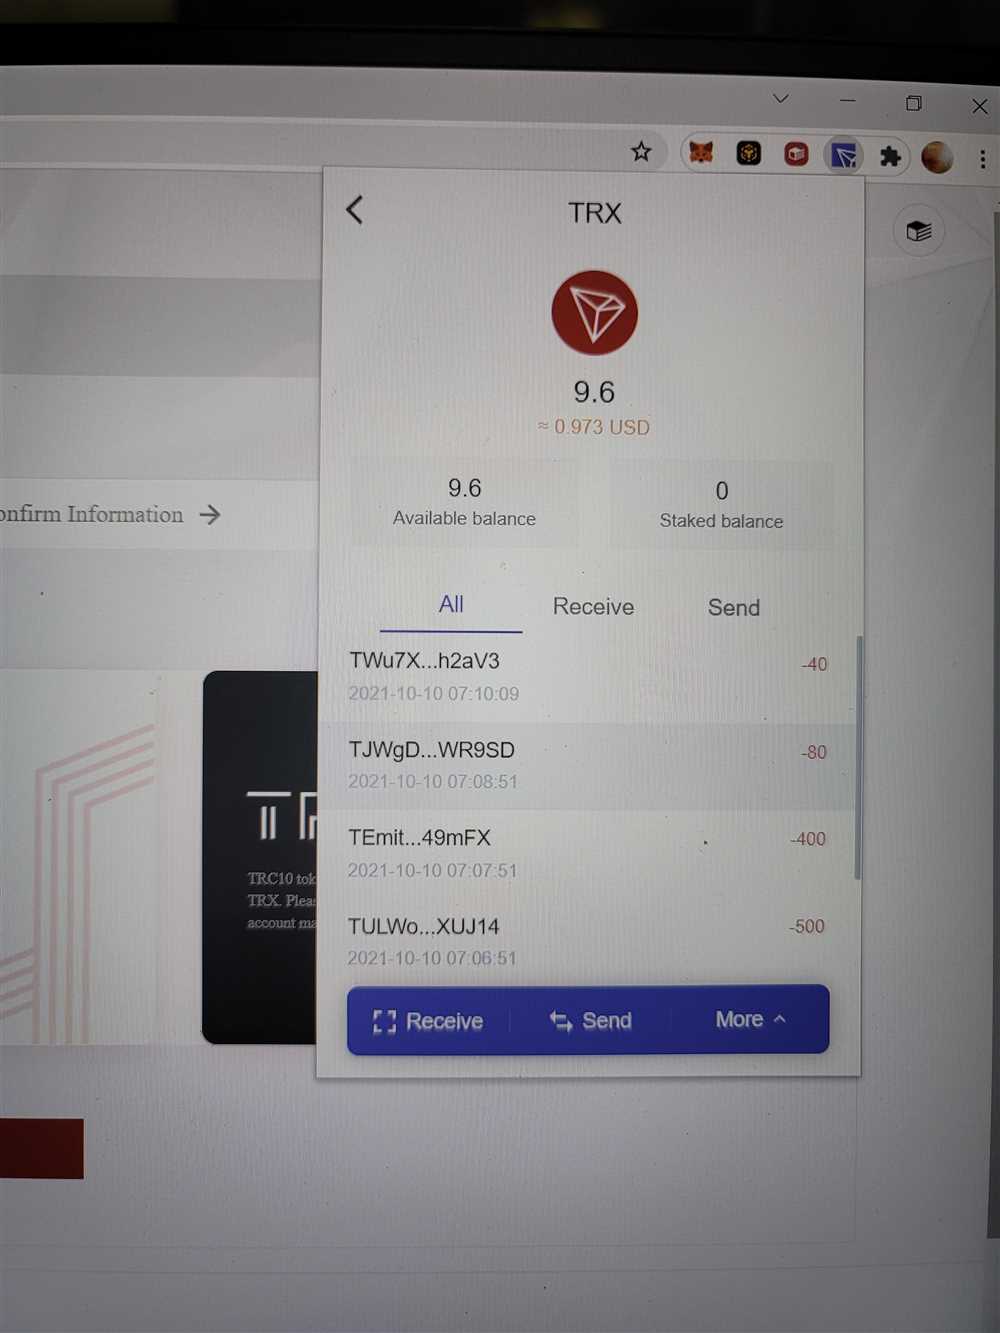 Tronlink: The Complete Wallet for Tron (TRX) Transactions and More